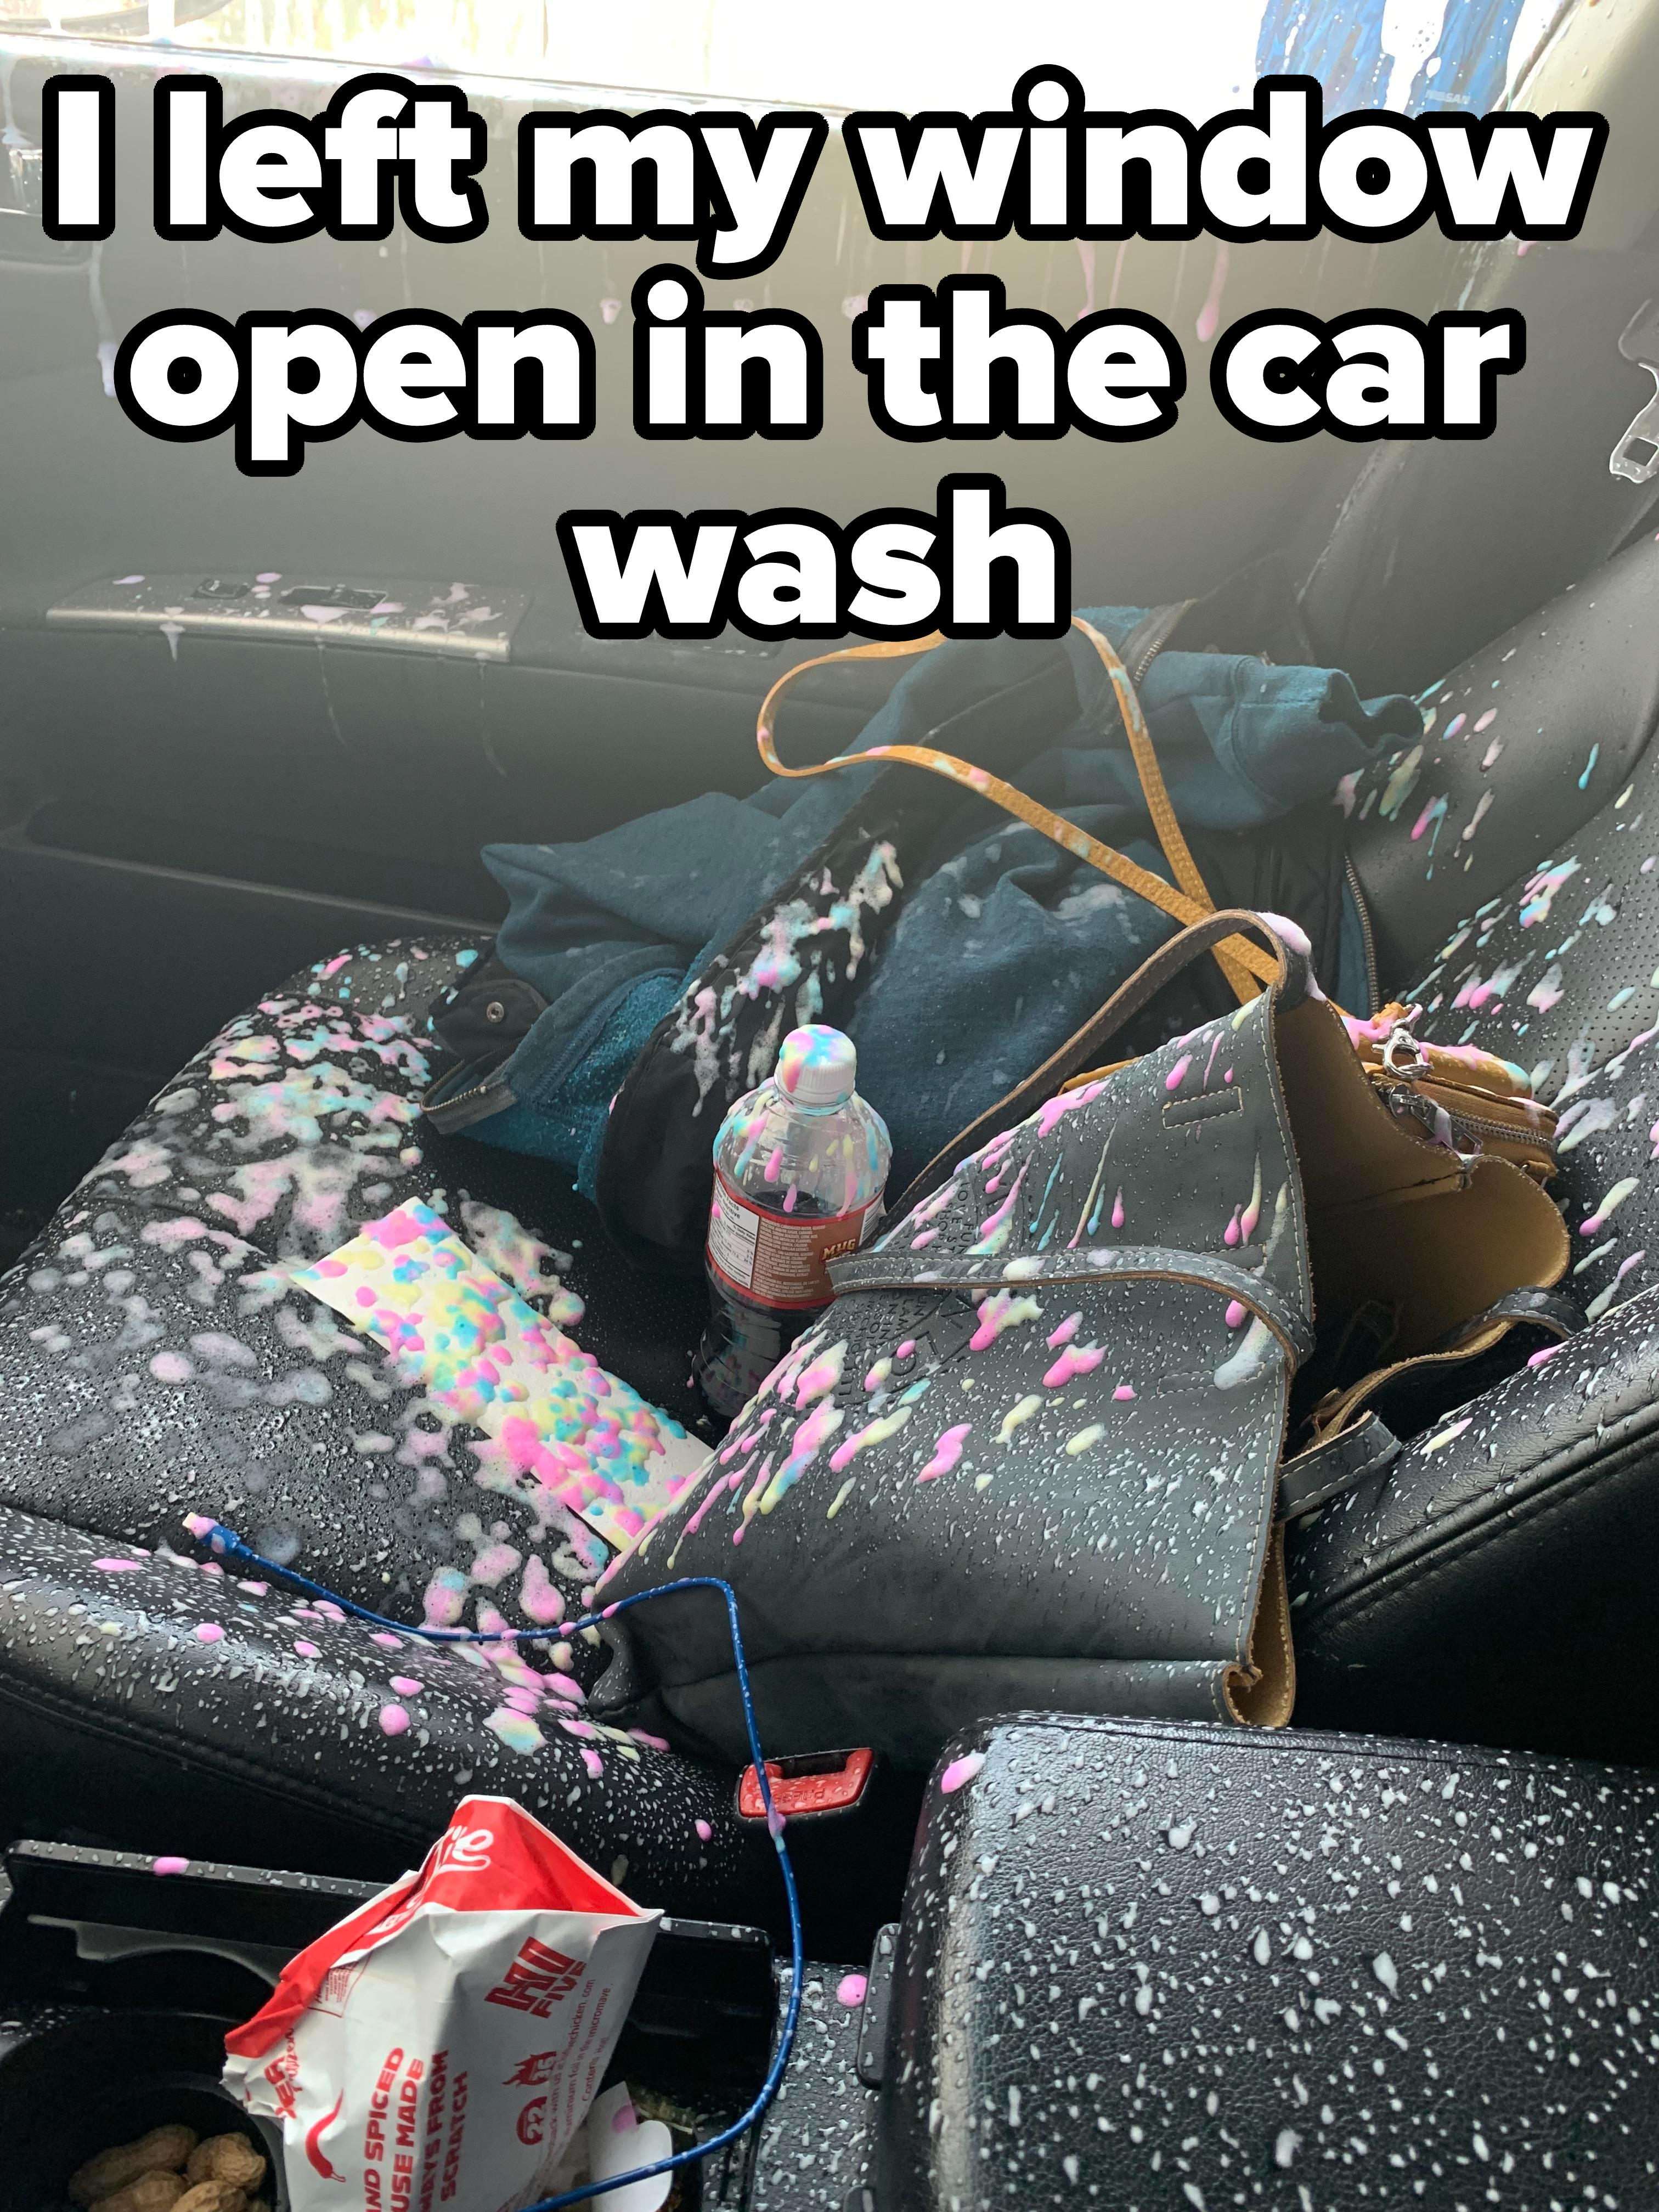 &quot;I left my window open in the car wash.&quot;